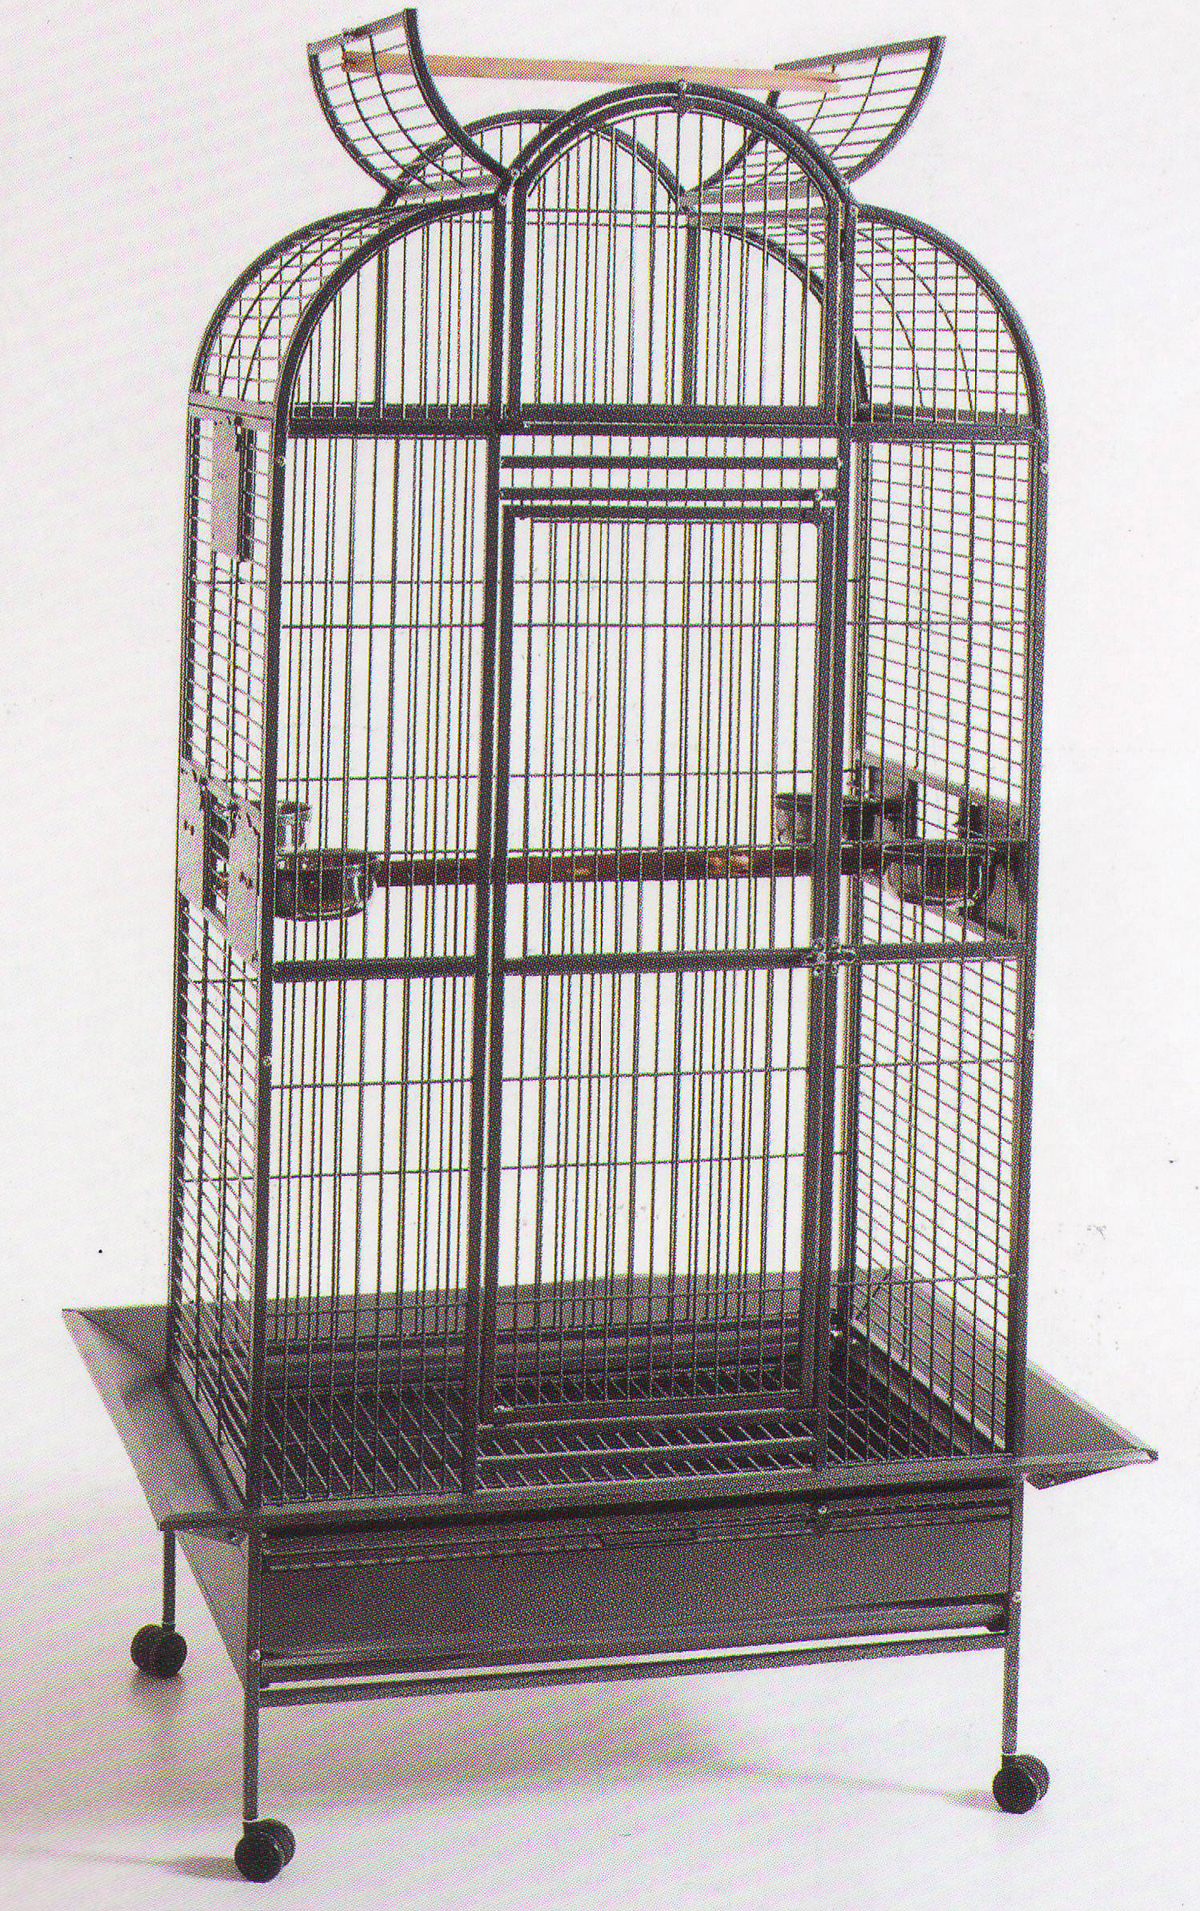 Large Playtop Bird Cage Parrot Cage Macaw Wrought Iron 24 X22 X63 Black Hammert